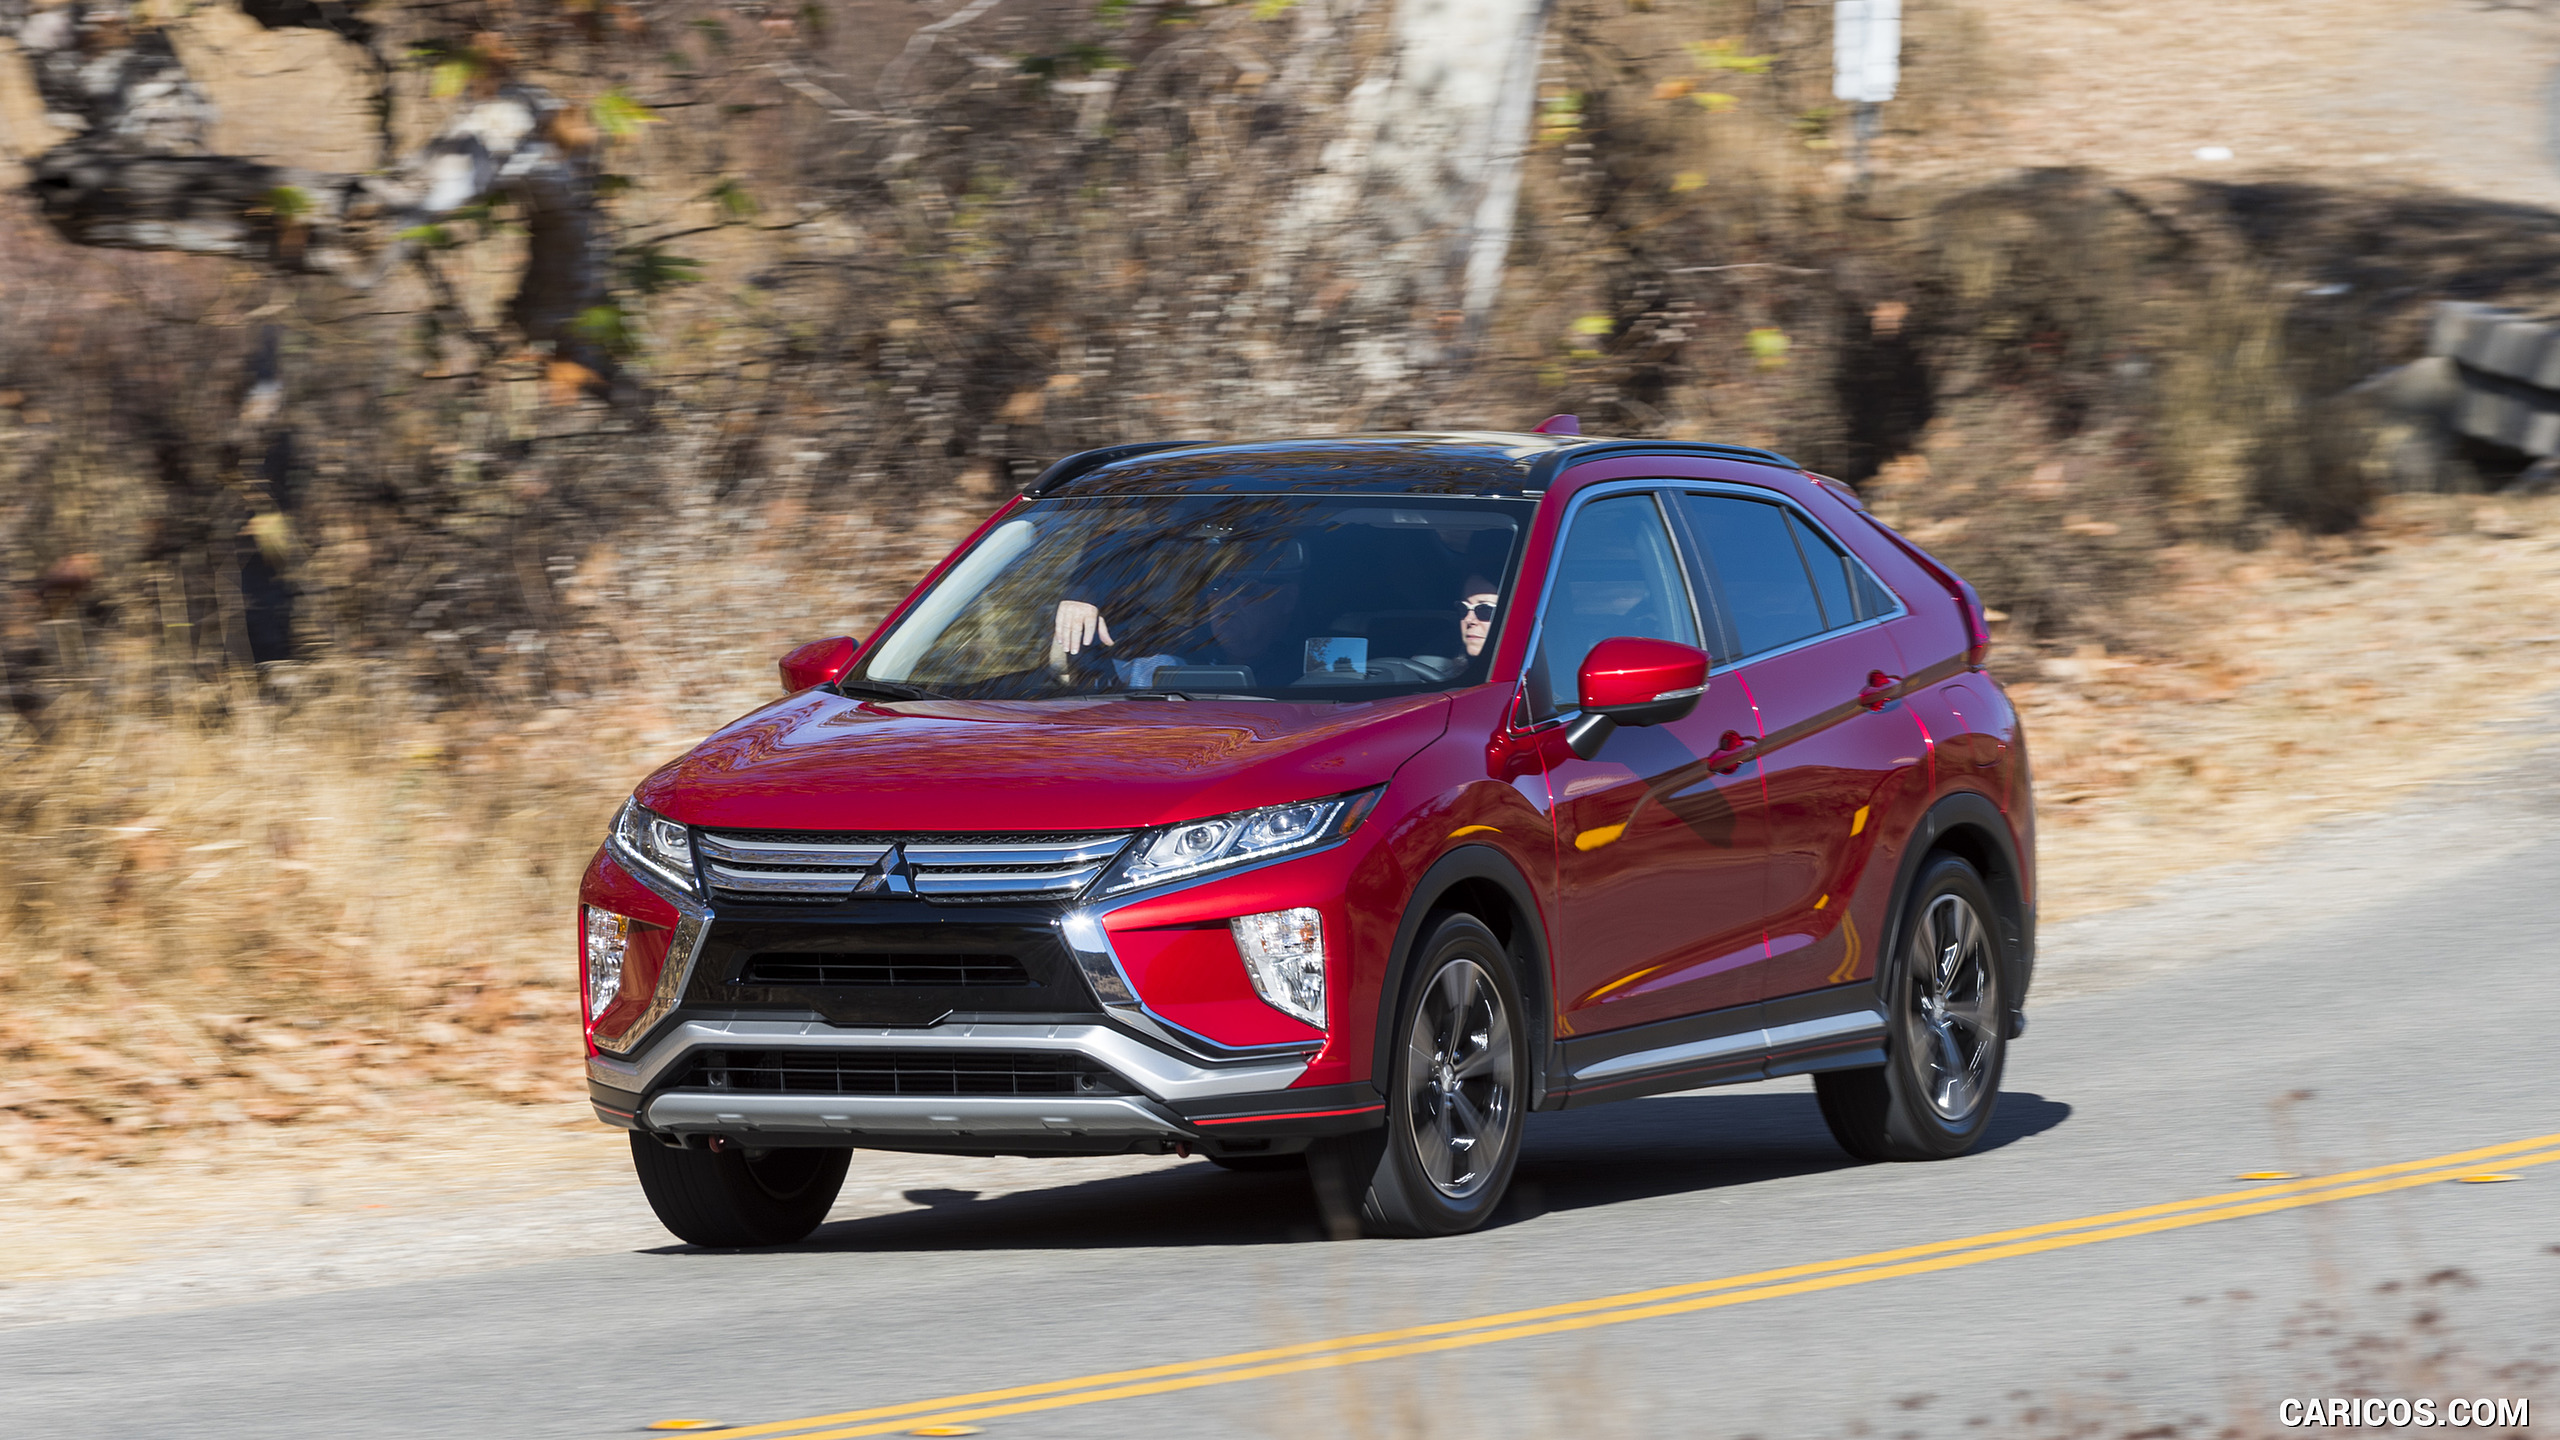 2018 Mitsubishi Eclipse Cross - Front, #38 of 173